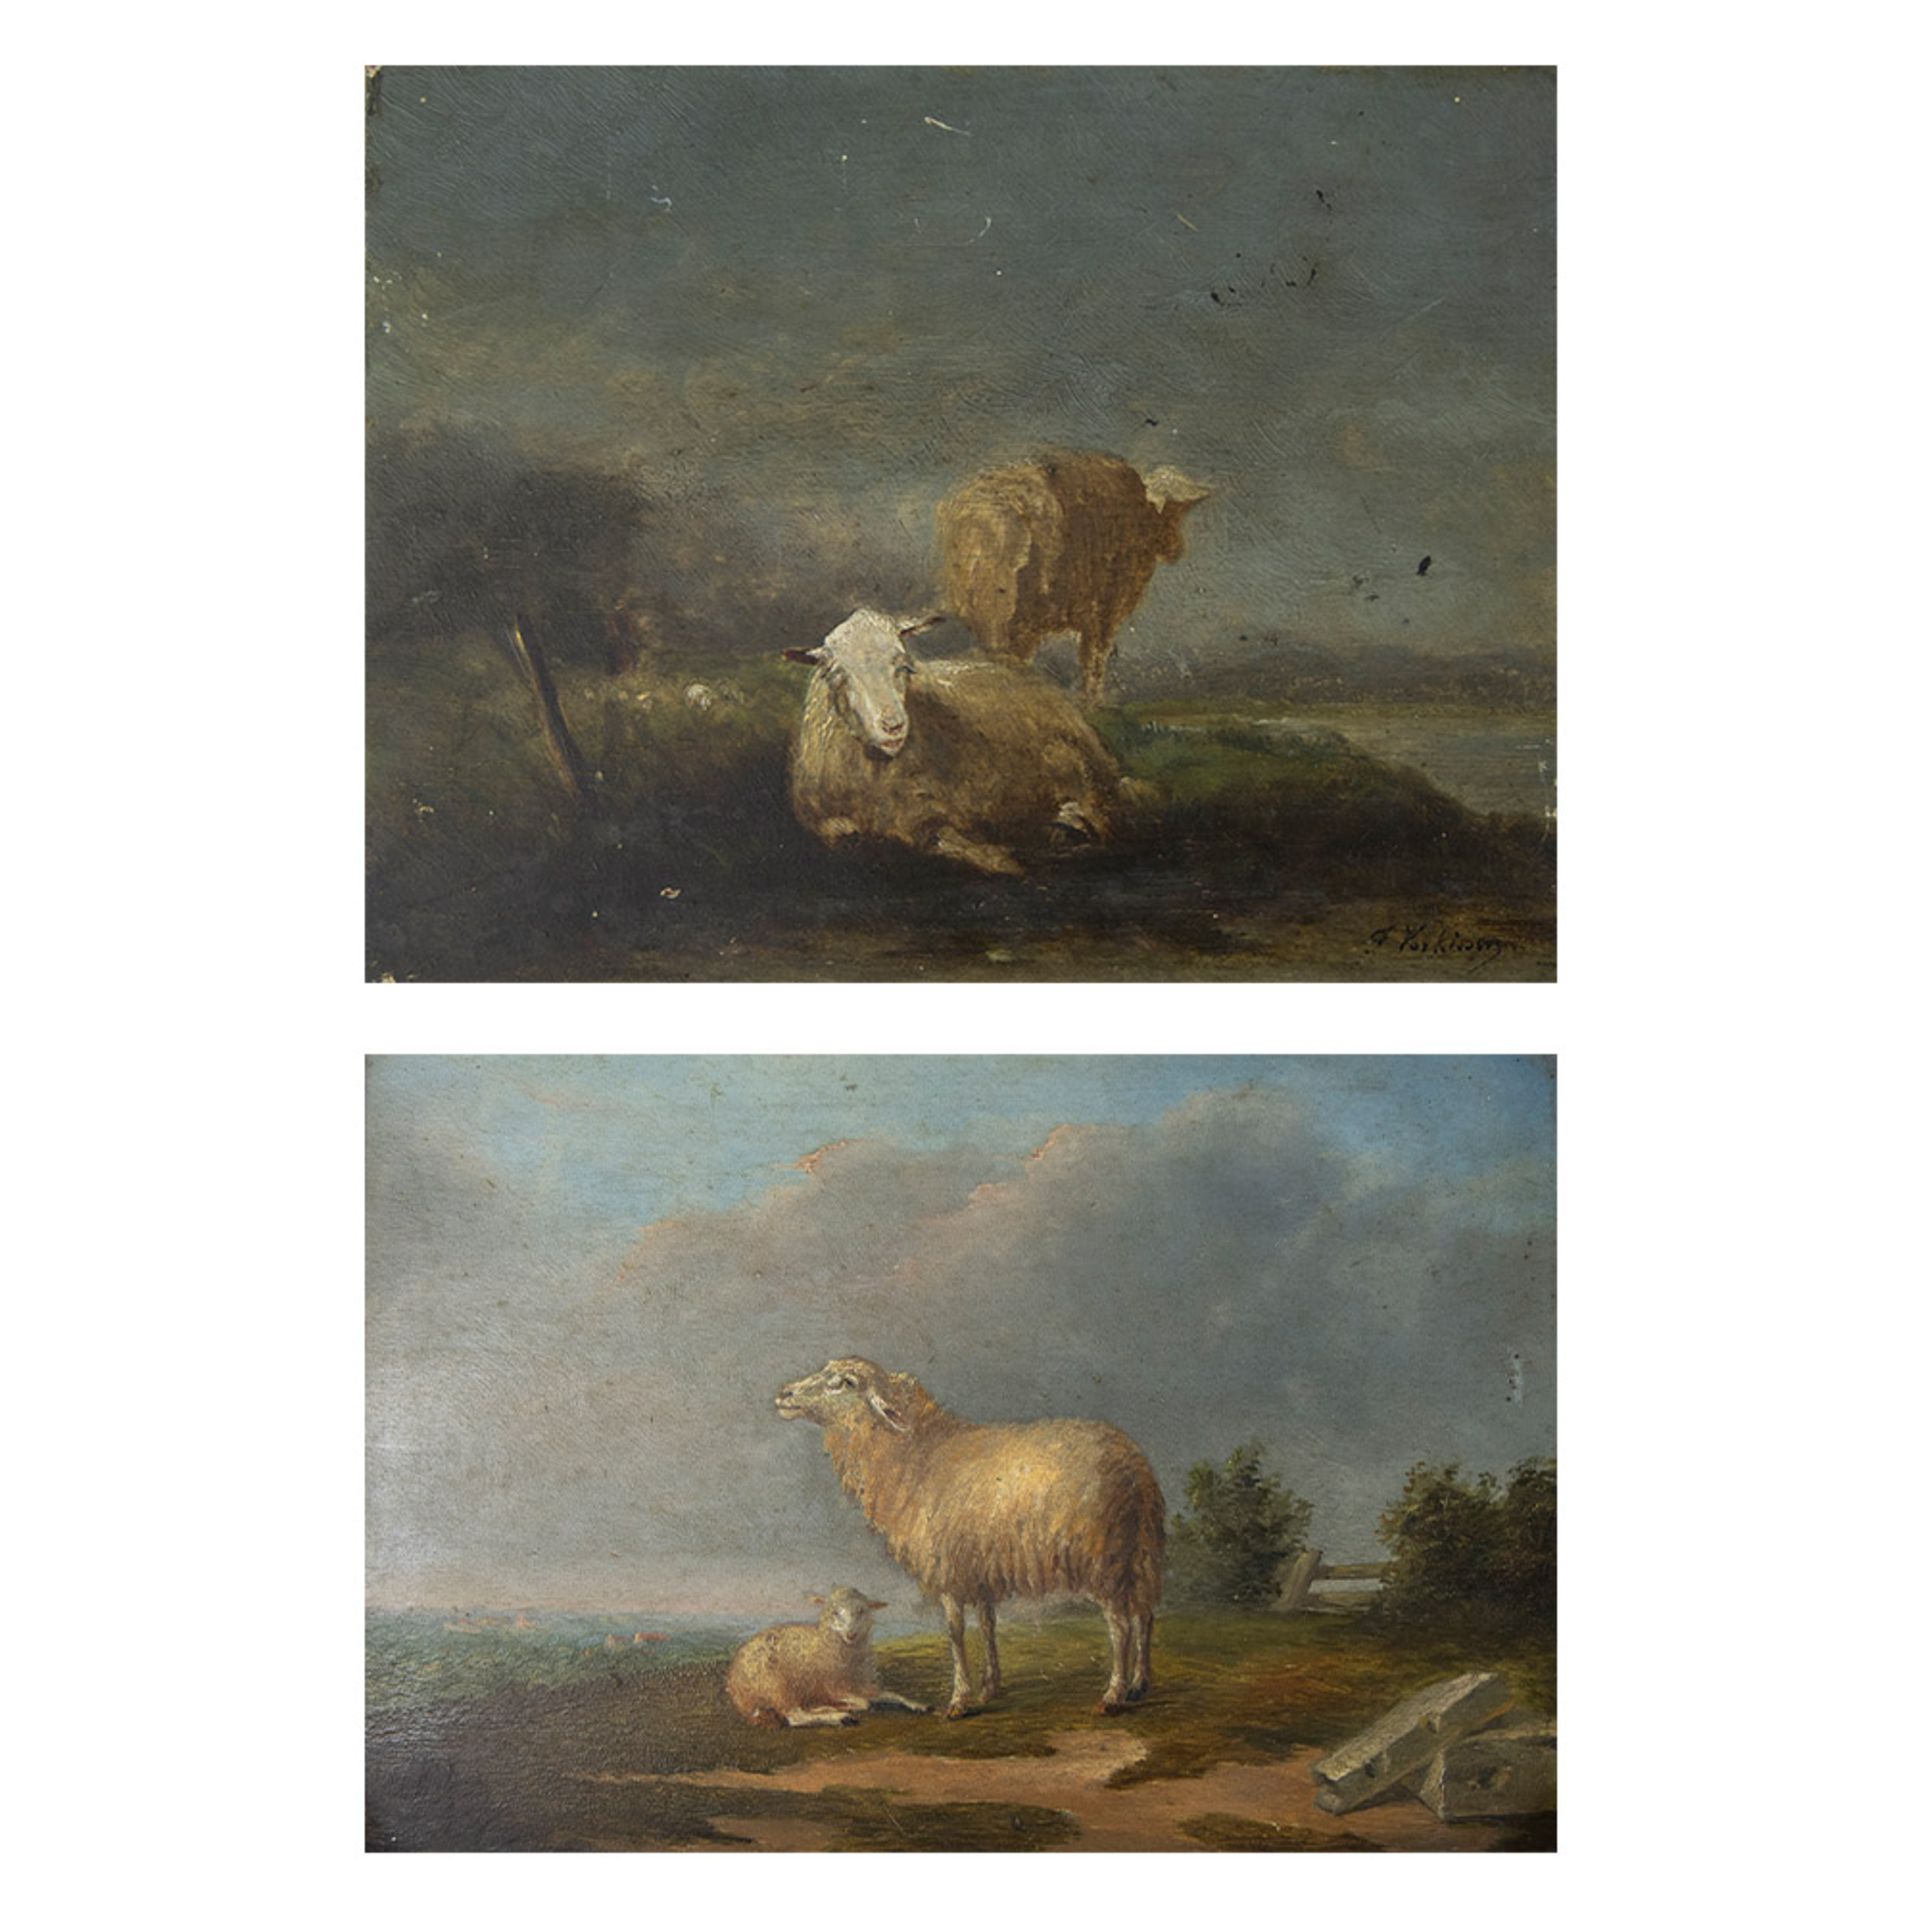 Lot of 2 19th century works, oil on panel Sheep in landscape